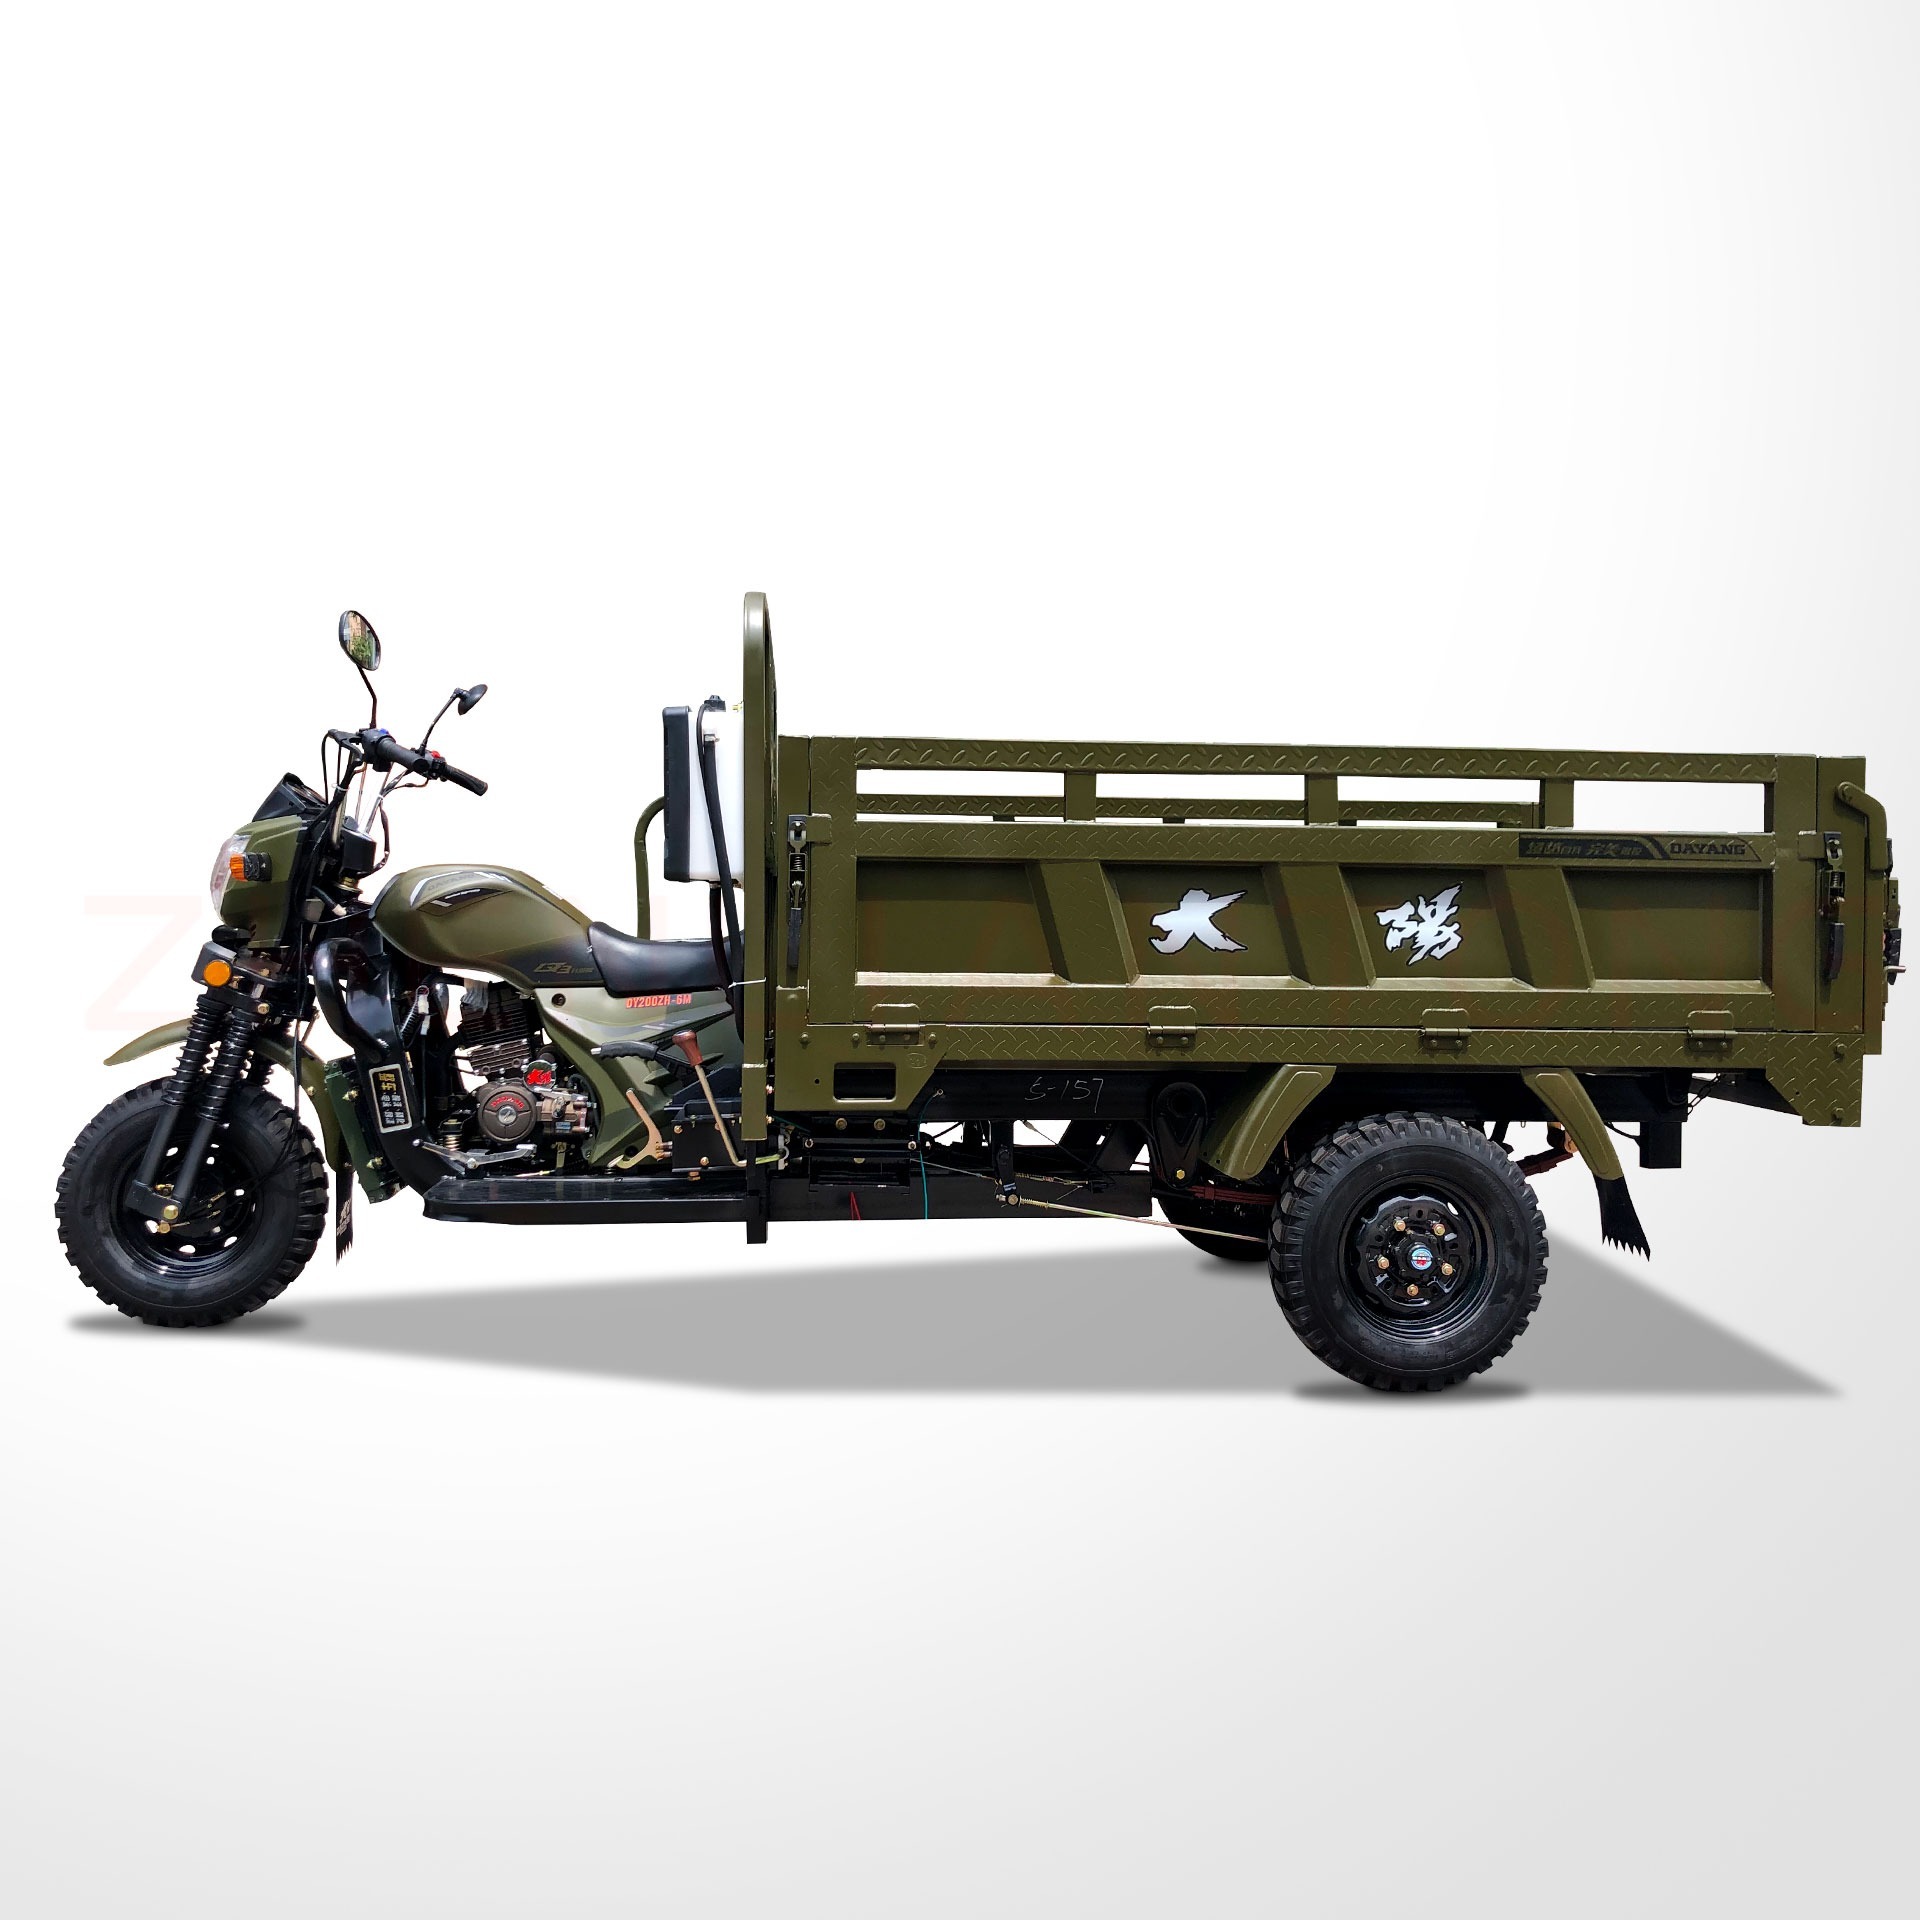 Q3-5B New Luxury Motorcycle Motorized Gas Power good design truck chinese cargo sudan motor tricycle trimoto engine 300cc